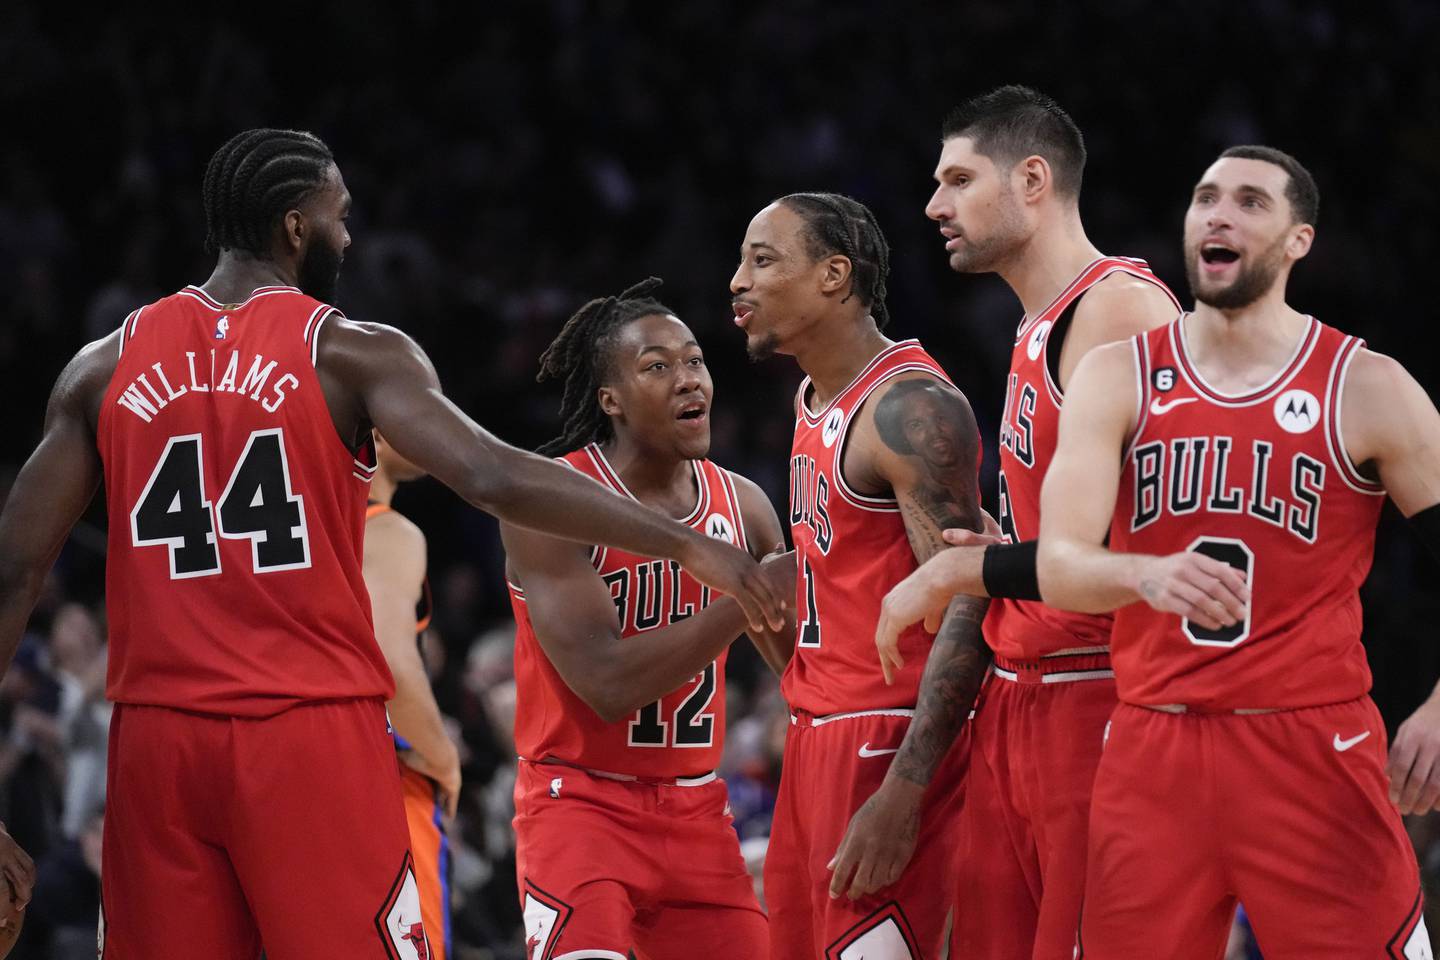 Bulls forward DeMar DeRozan, center, celebrates with teammates after hitting the winning basket during the closing seconds against the Knicks on Friday at Madison Square Garden in New York. The Bulls won 118-117. 